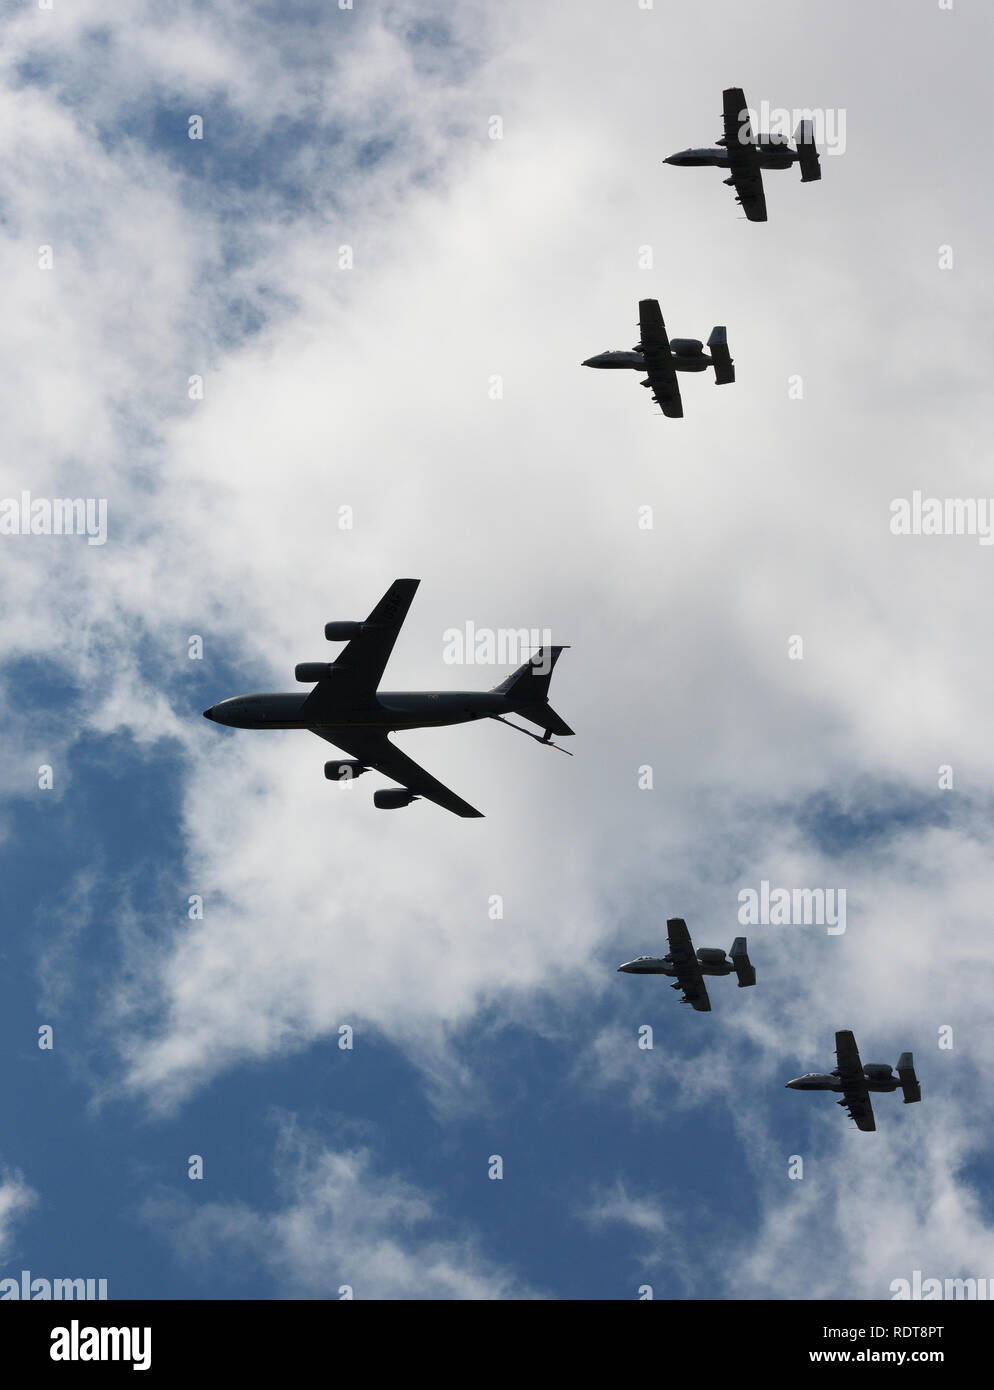 Boeing KC-135 Stratotanker refueling jet with A-10 Warthogs in formation for refueling demo in air show Stock Photo